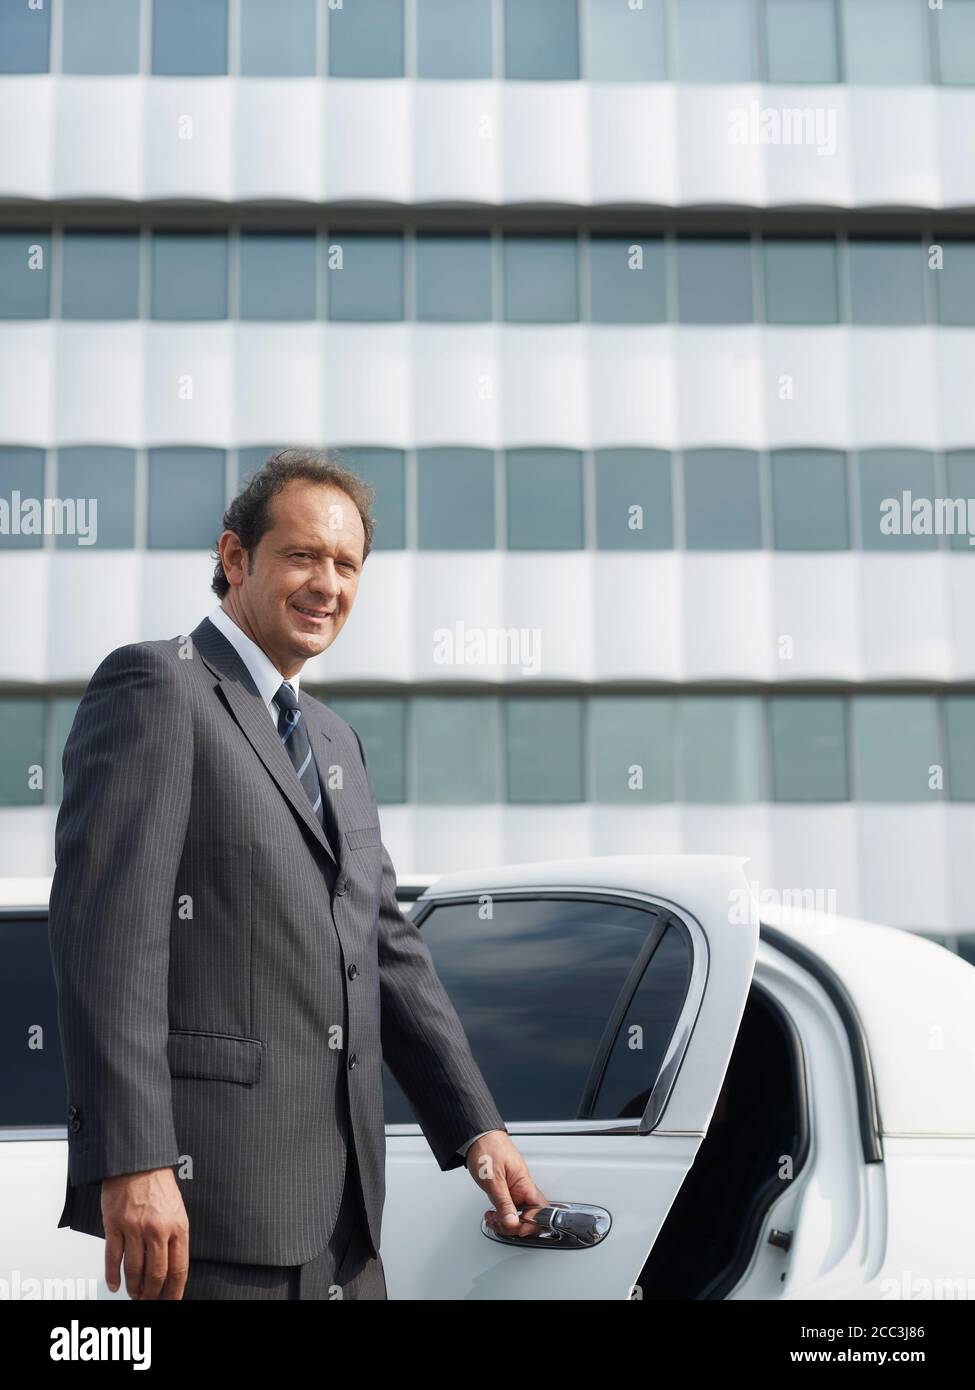 Portrait Of Man Working As Driver In White Limousine Stock Photo